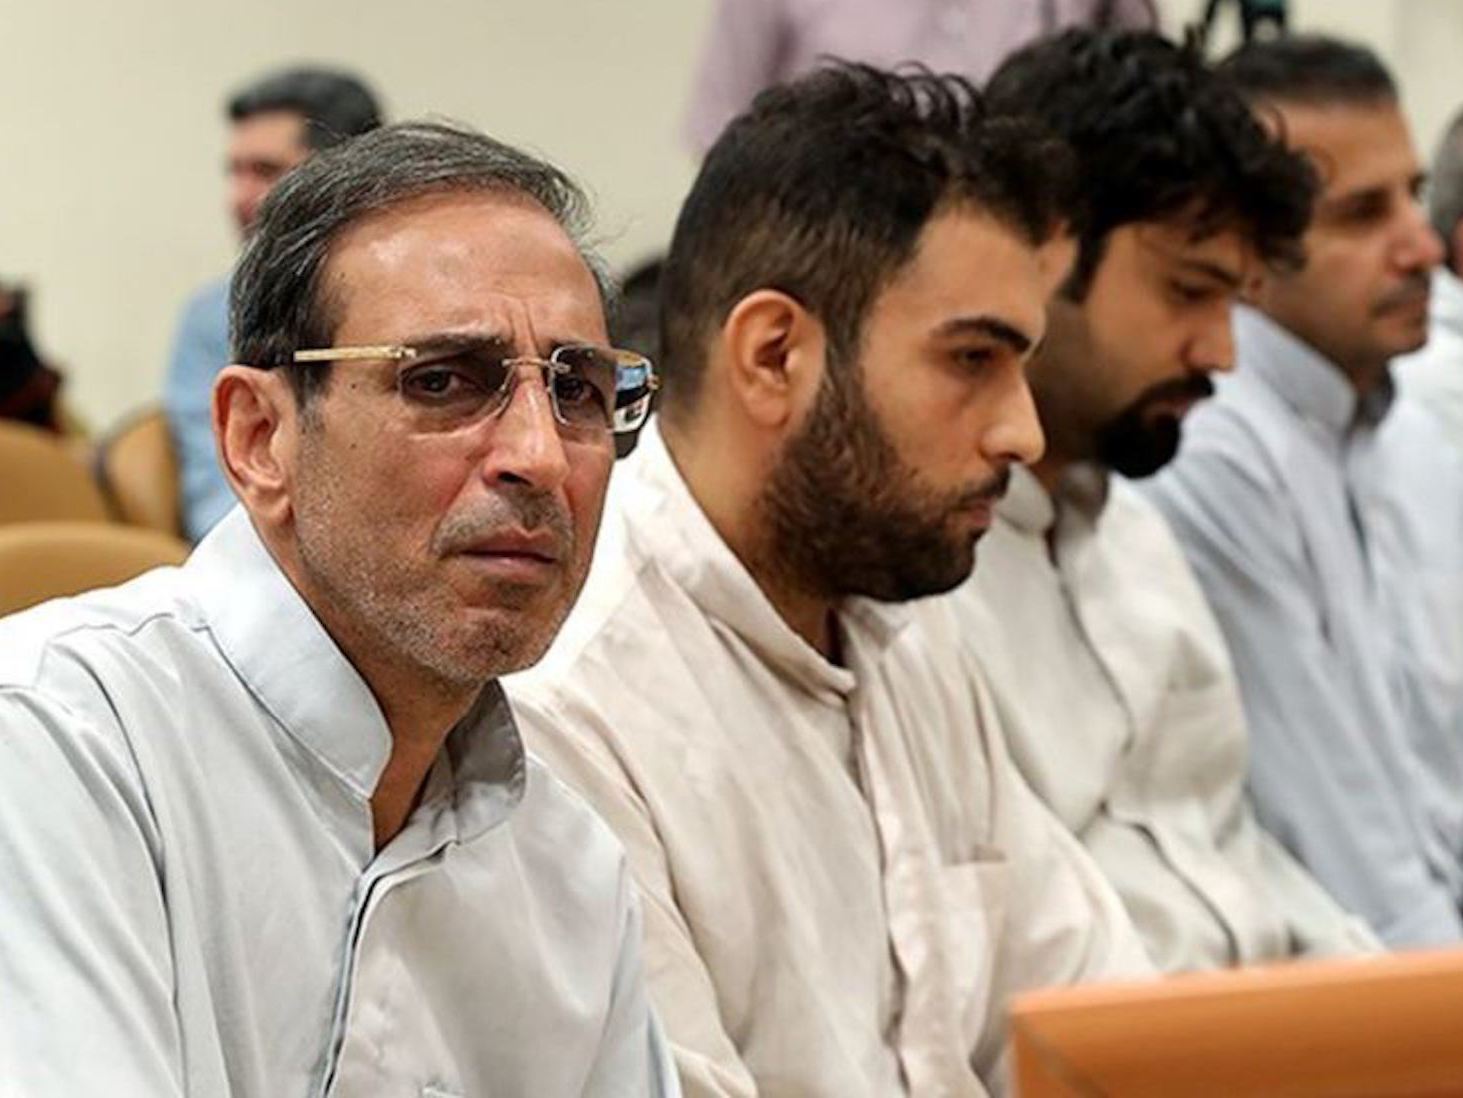 Iranian gold trader Vahid Mazloumin (left) during his trial in September on corruption charges